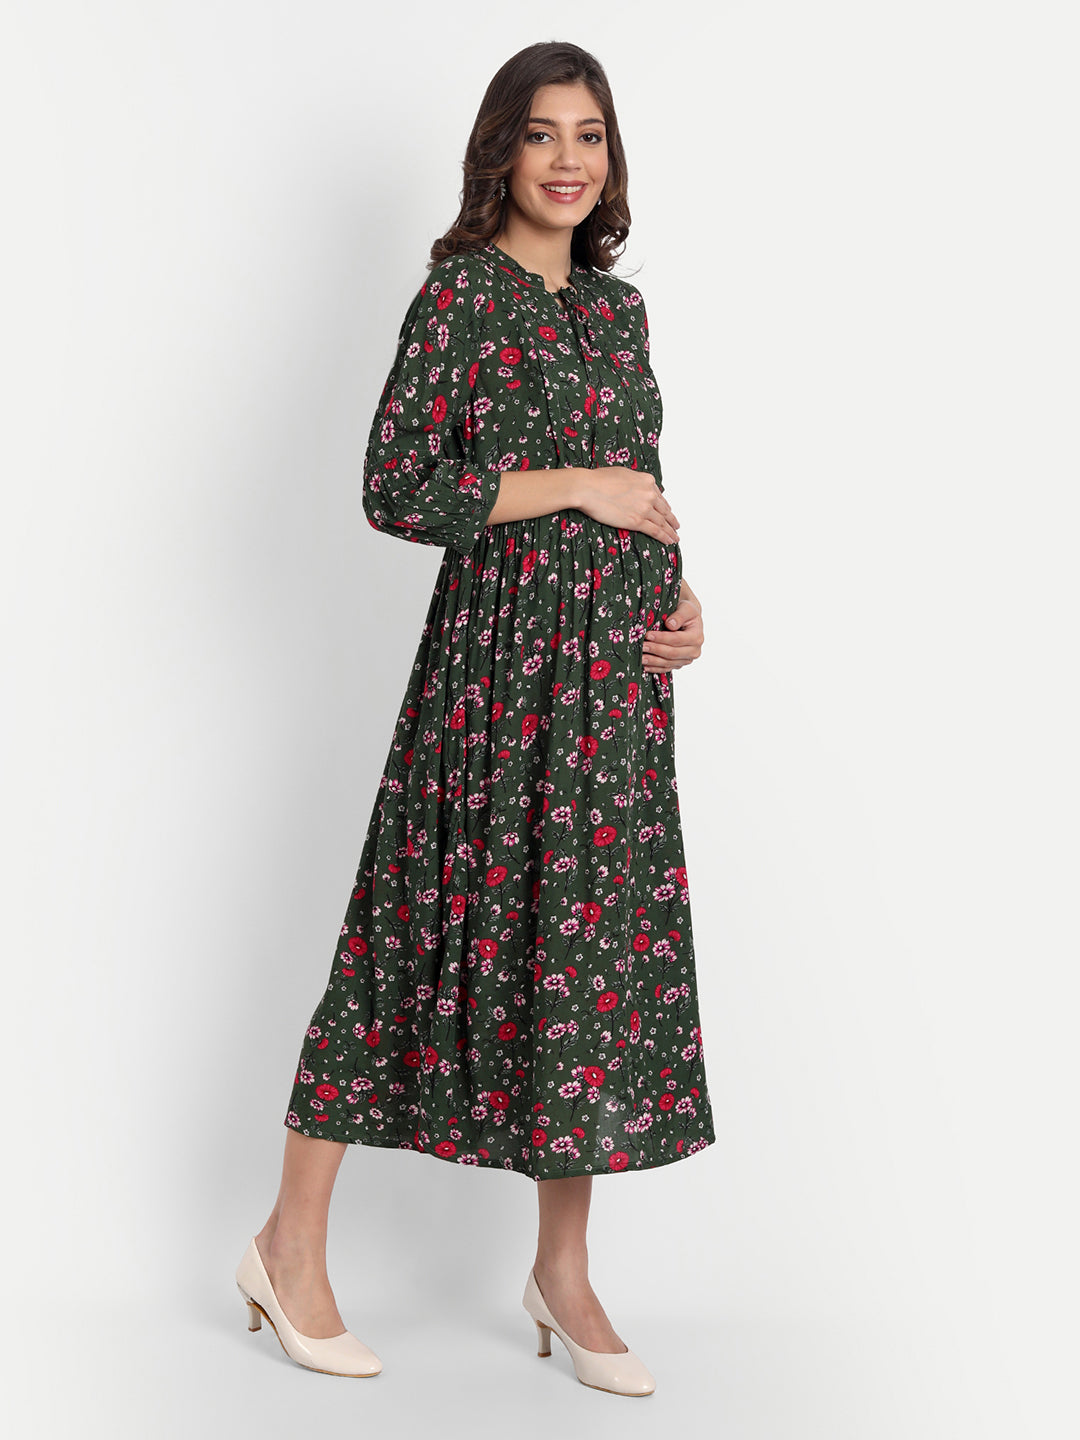 Green & Red Floral Printed Maternity Midi Dress